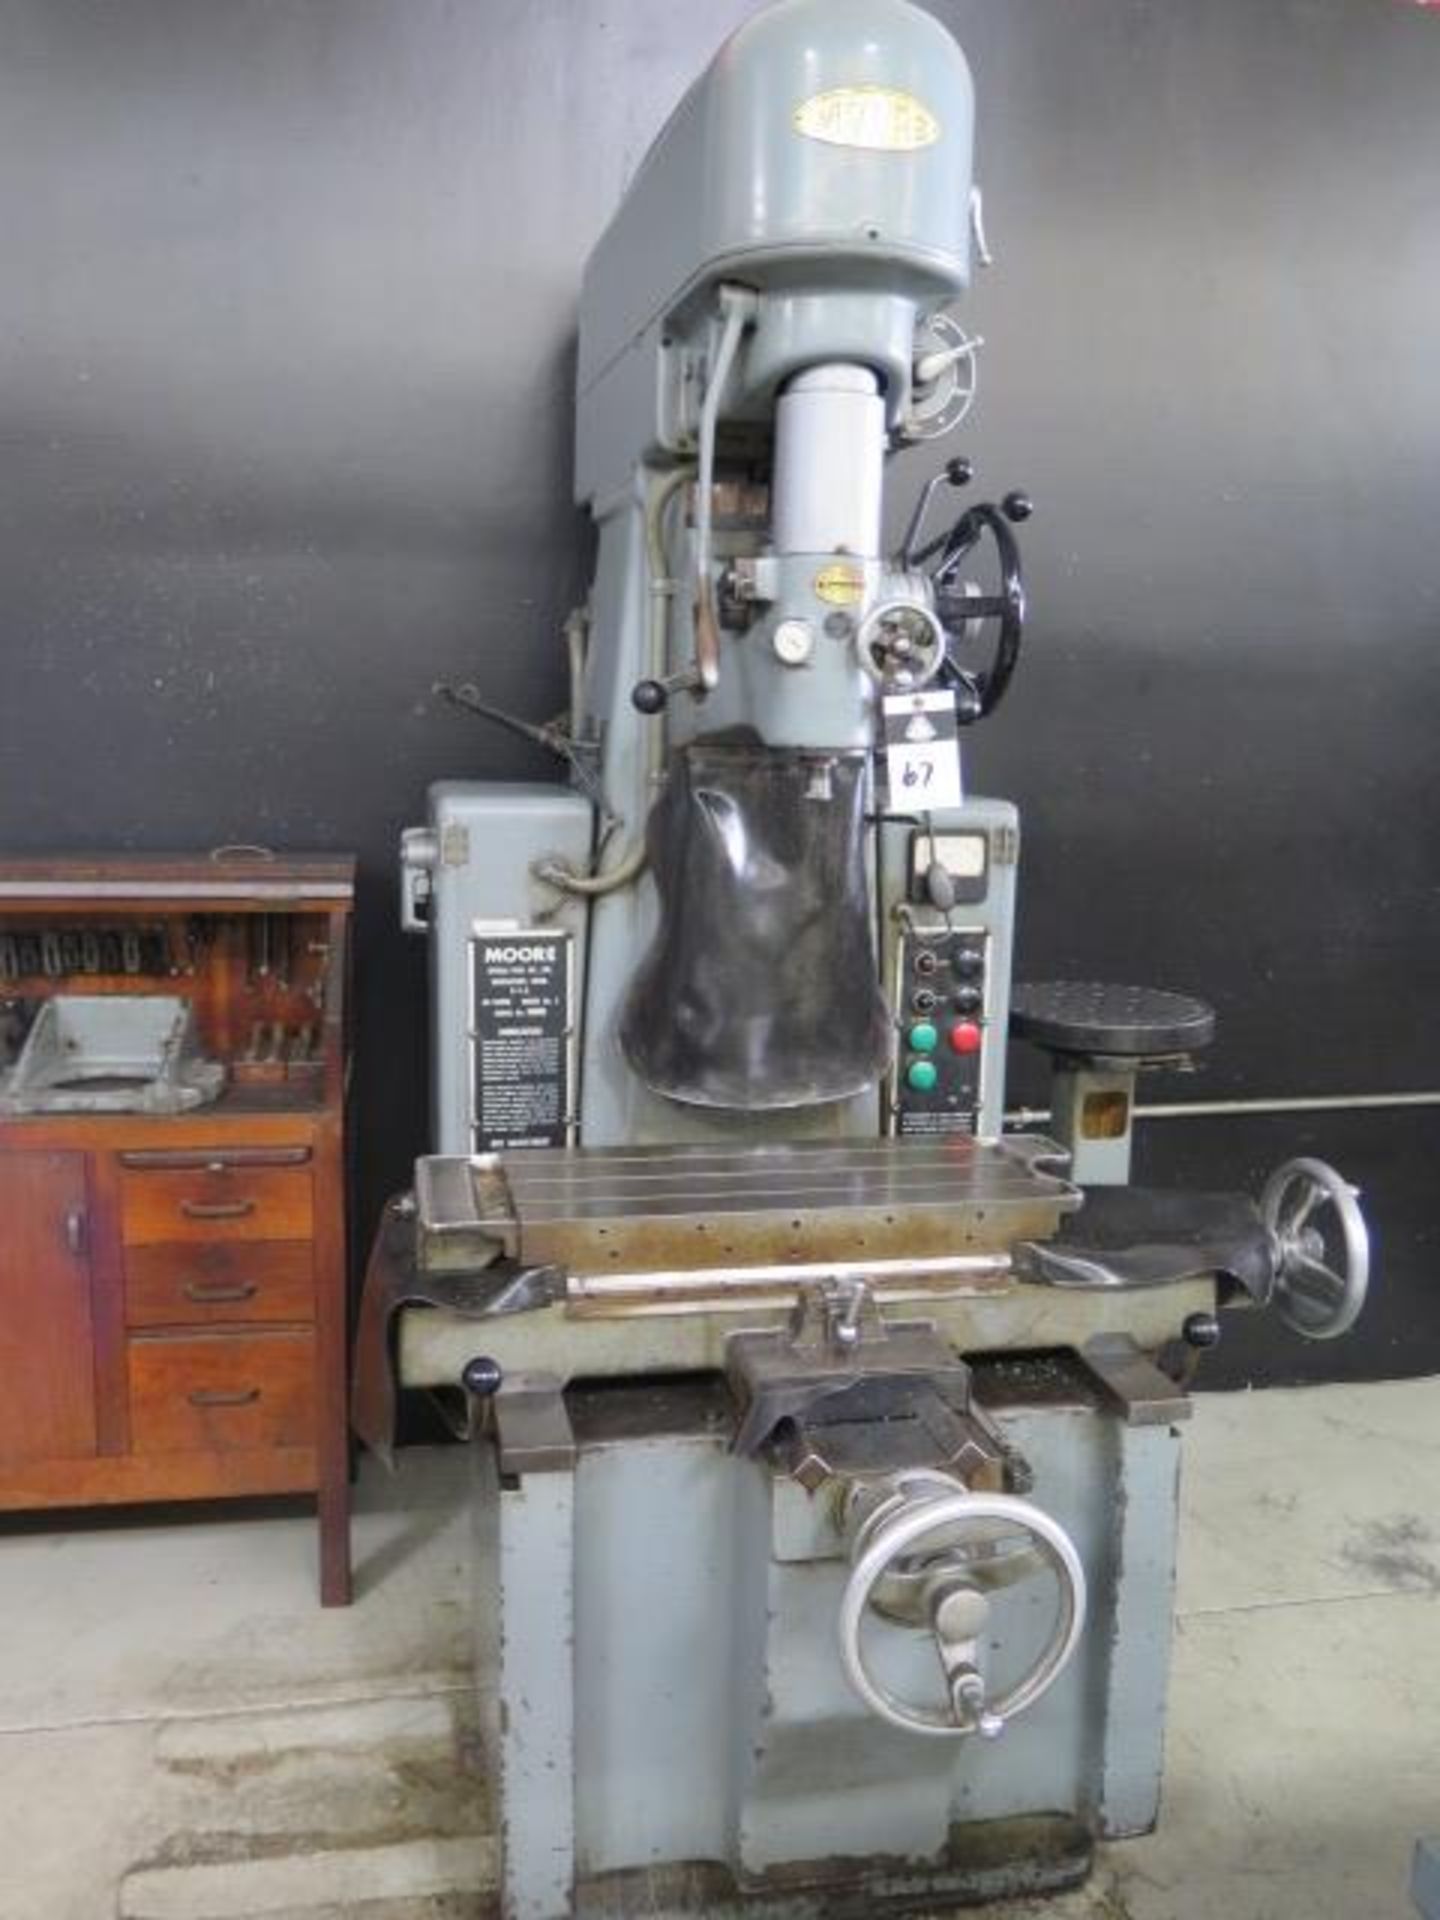 Moore No. 3 Jig Boring Machine s/n B832 w/ 2500 RPM, Moore Taper Spindle, Power Feeds, SOLD AS IS